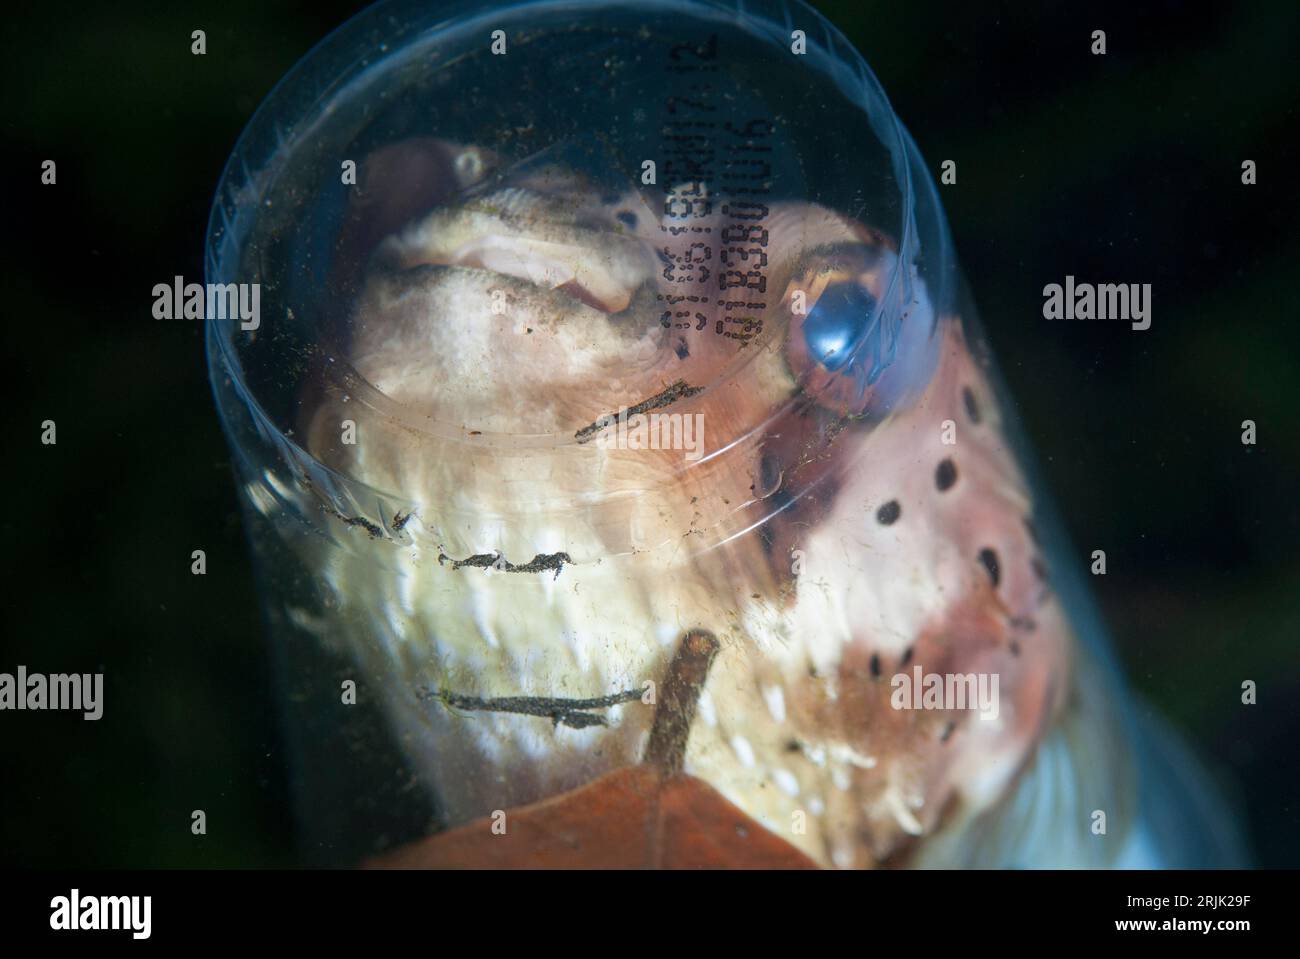 Orbicular Burrfish, Cyclichthys orbicularis, stuck in plastic cup, night dive, TK1 dive site, Lembeh Straits, Sulawesi, Indonesia Stock Photo